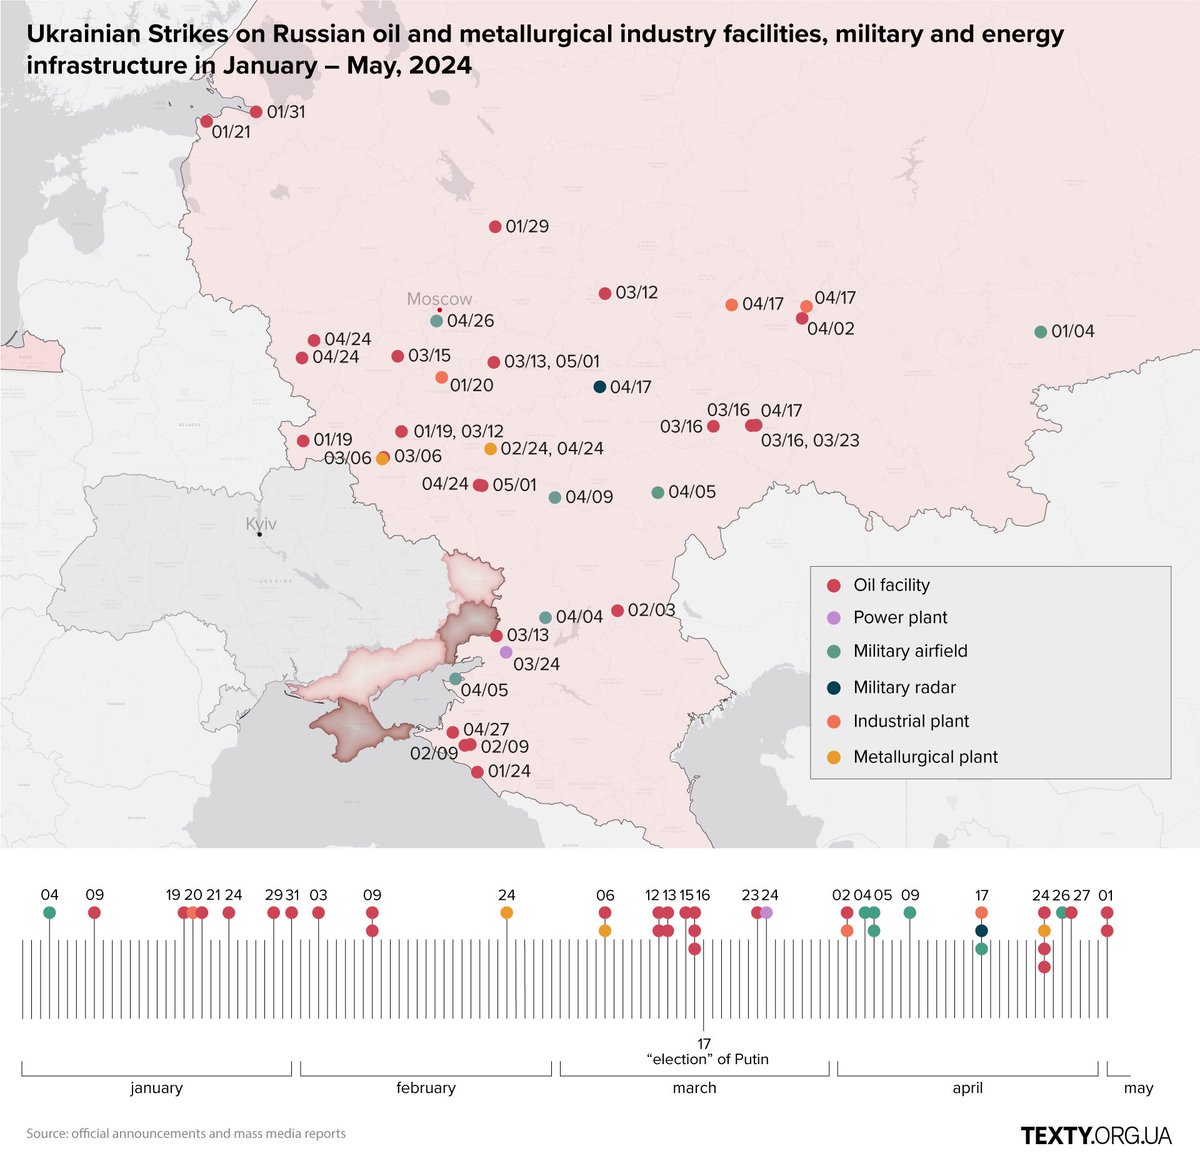 In 2024, Ukraine intensified strikes on Russian oil refineries, power plants & military sites using drones hitting targets as far as 1000 km away. Texty.org.ua visualised these strikes on the map using data collected between January-April 2024.